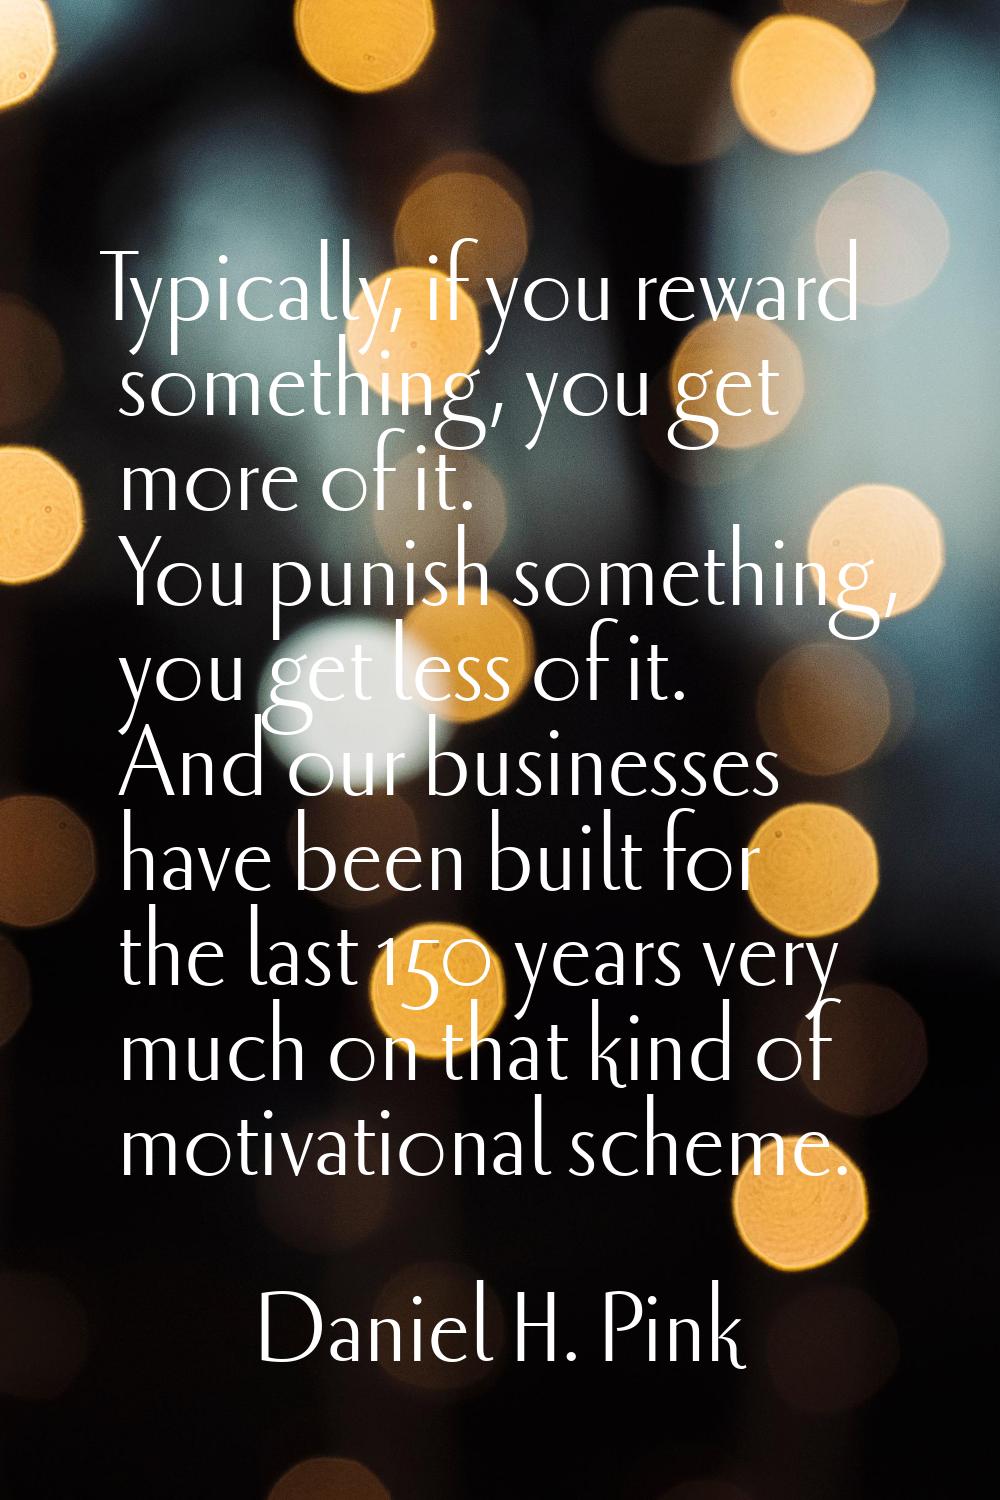 Typically, if you reward something, you get more of it. You punish something, you get less of it. A